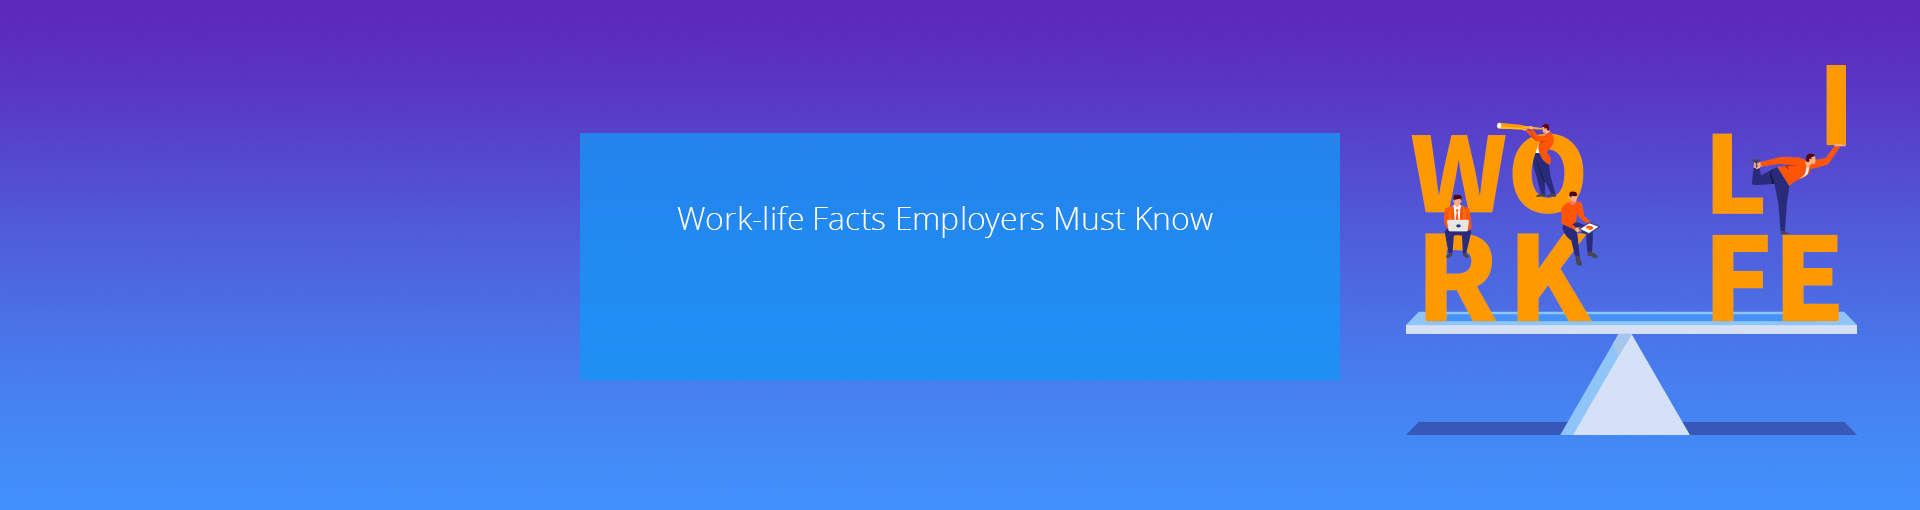 Work-life Facts Employers Must Know Featured Image